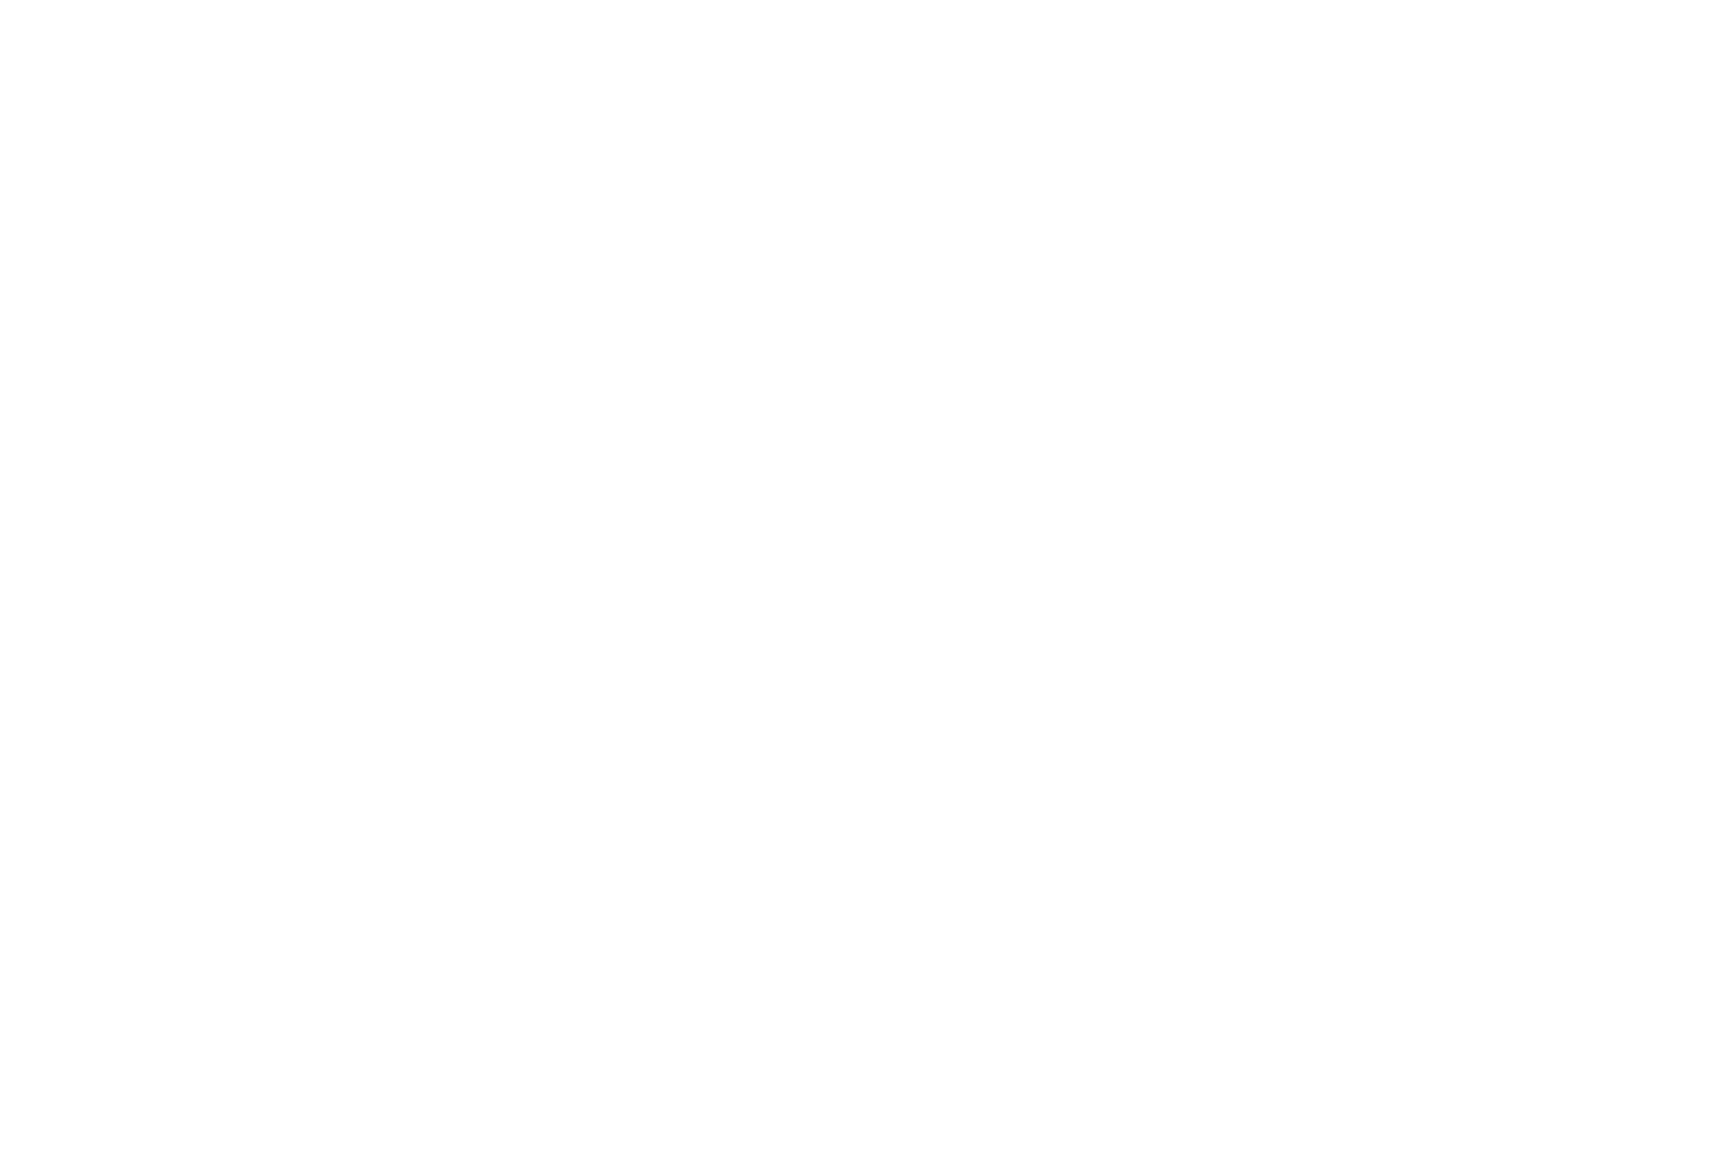 AWARD WINNER - Best Shorts Competition - 2020 (1) (1).png